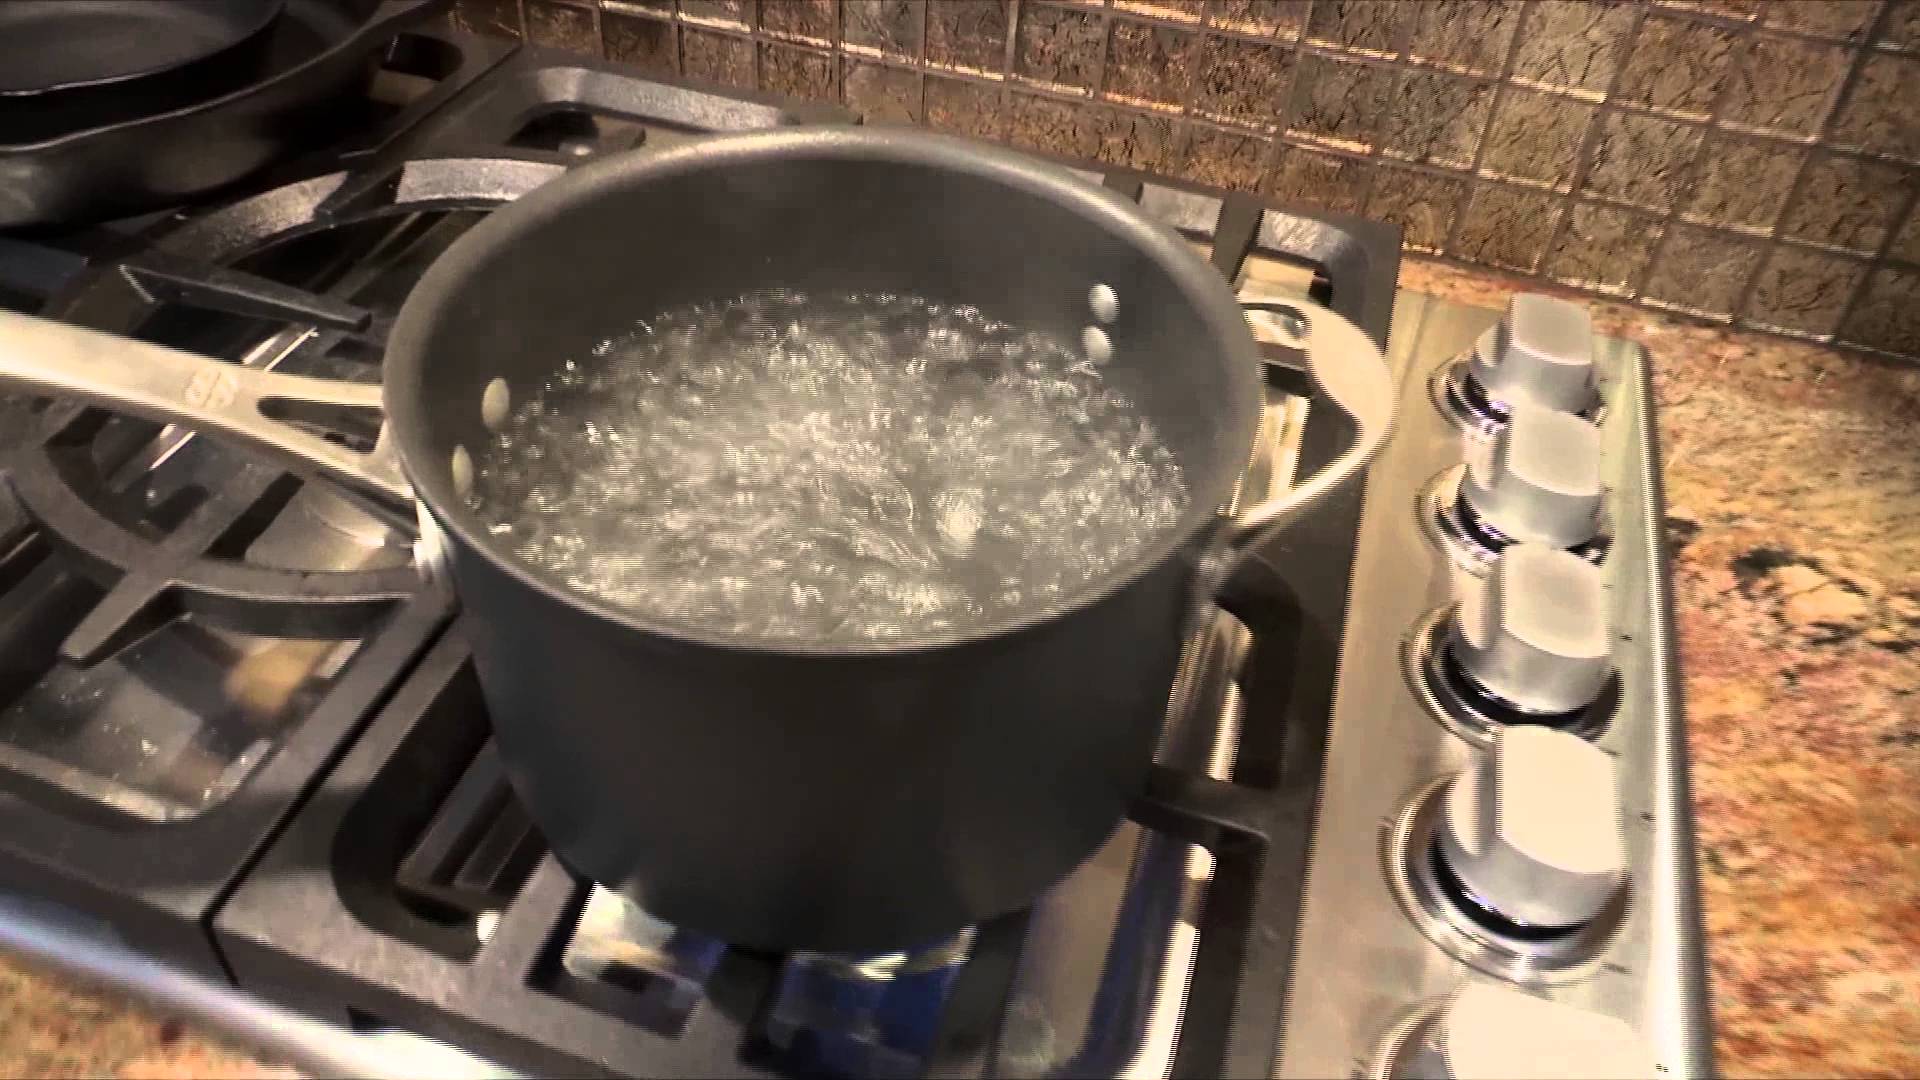 Boil Water Notifications - How to Properly Boil Water for Safe ...